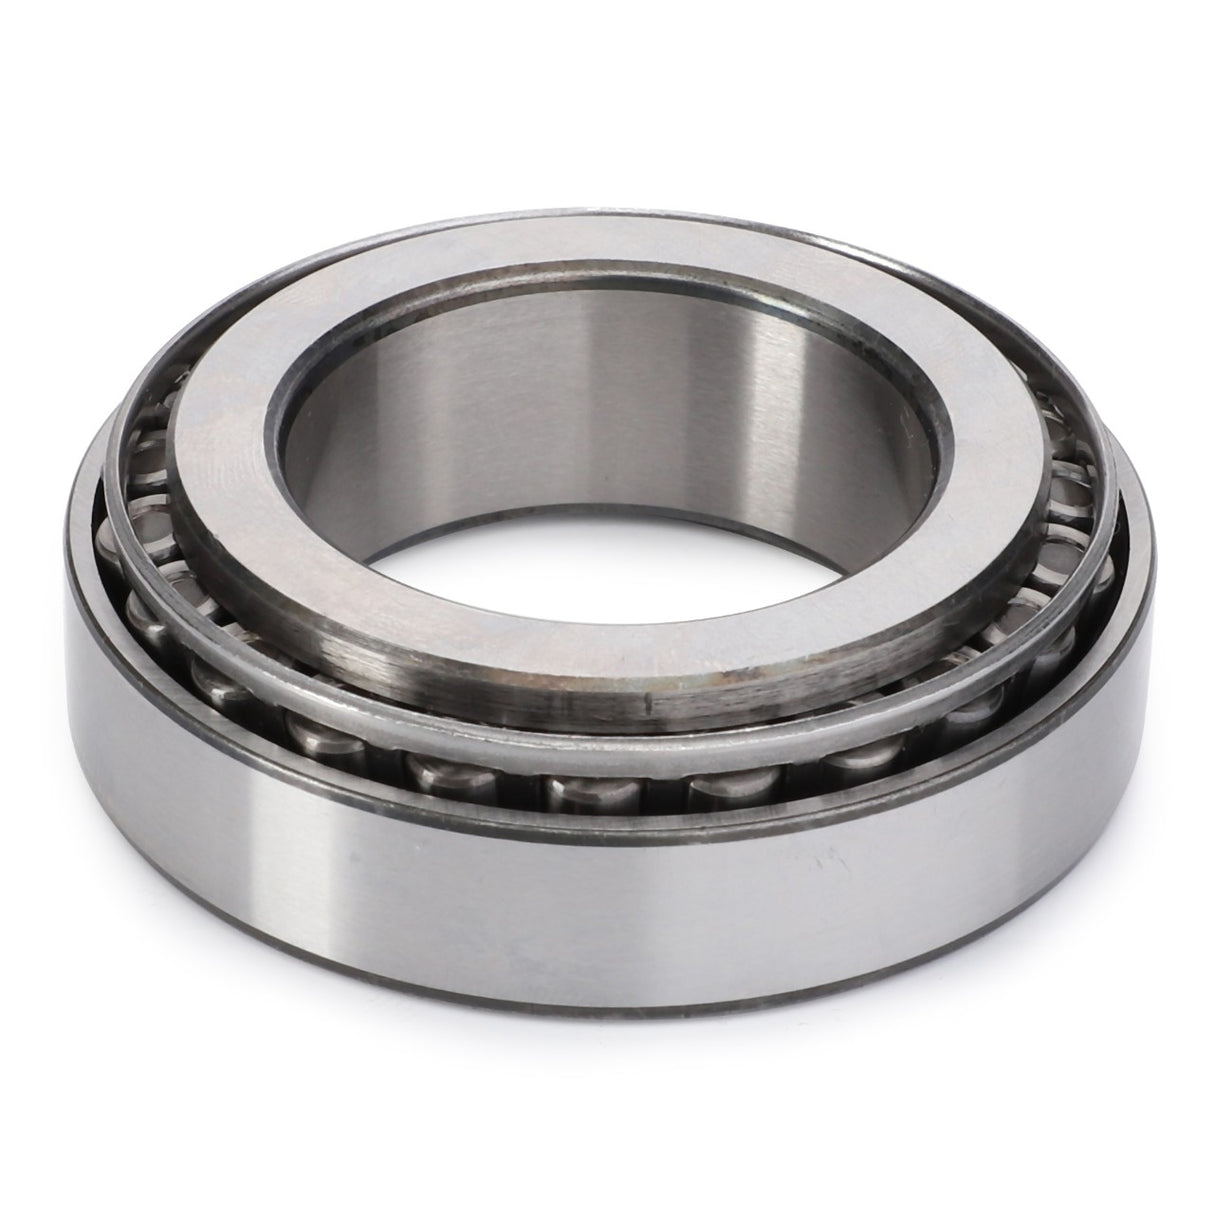 AGCO | Taper Roller Bearing - G822100200170 - Farming Parts